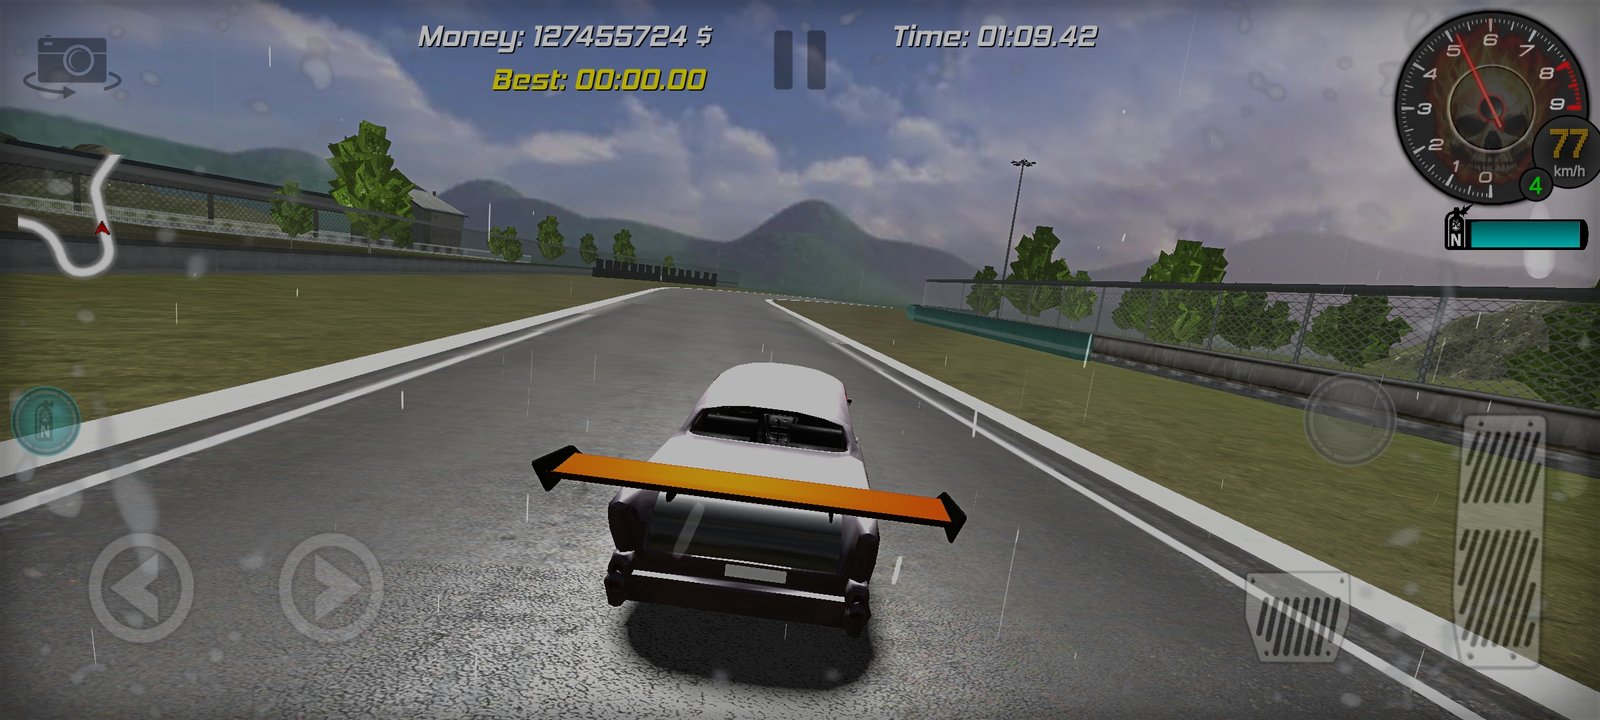 Drifting & Driving-Drift Games 3.3 APK + Mod [Unlimited money] for Android.